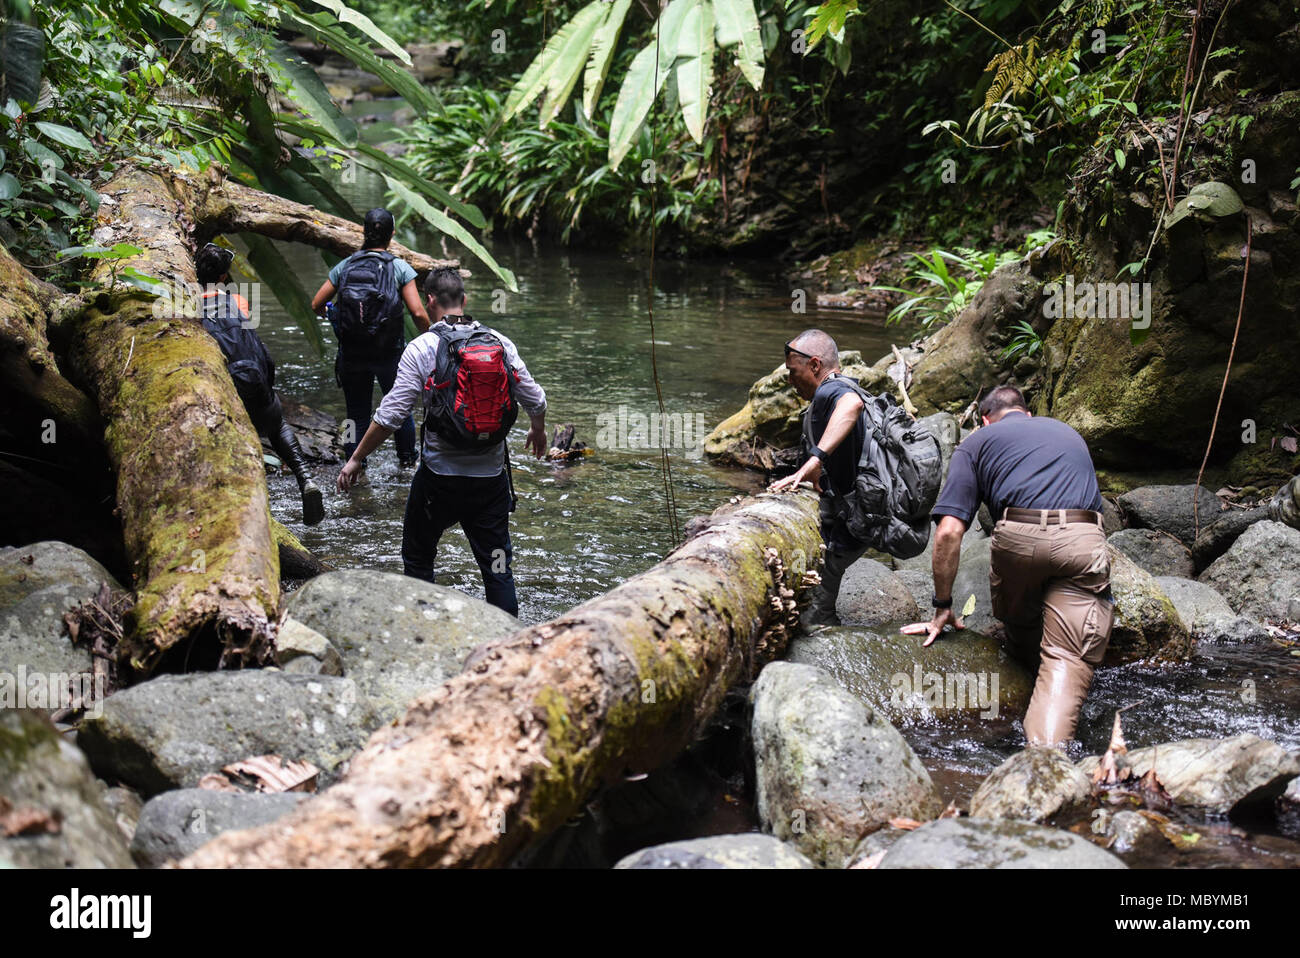 Members of the 346th Air Expeditionary Group hike through a river in the Darien National Park, Panama, April 2, 2018, during exercise New Horizons 2018. Following the hike, 346th AEG members spoke to local village members about the assistance that New Horizons 2018 will bring to the communities throughout the region. Exercise New Horizons is a joint training exercise where all branches of the U.S. military conduct training in civil engineer, medical and support services while benefiting the local community. Stock Photo